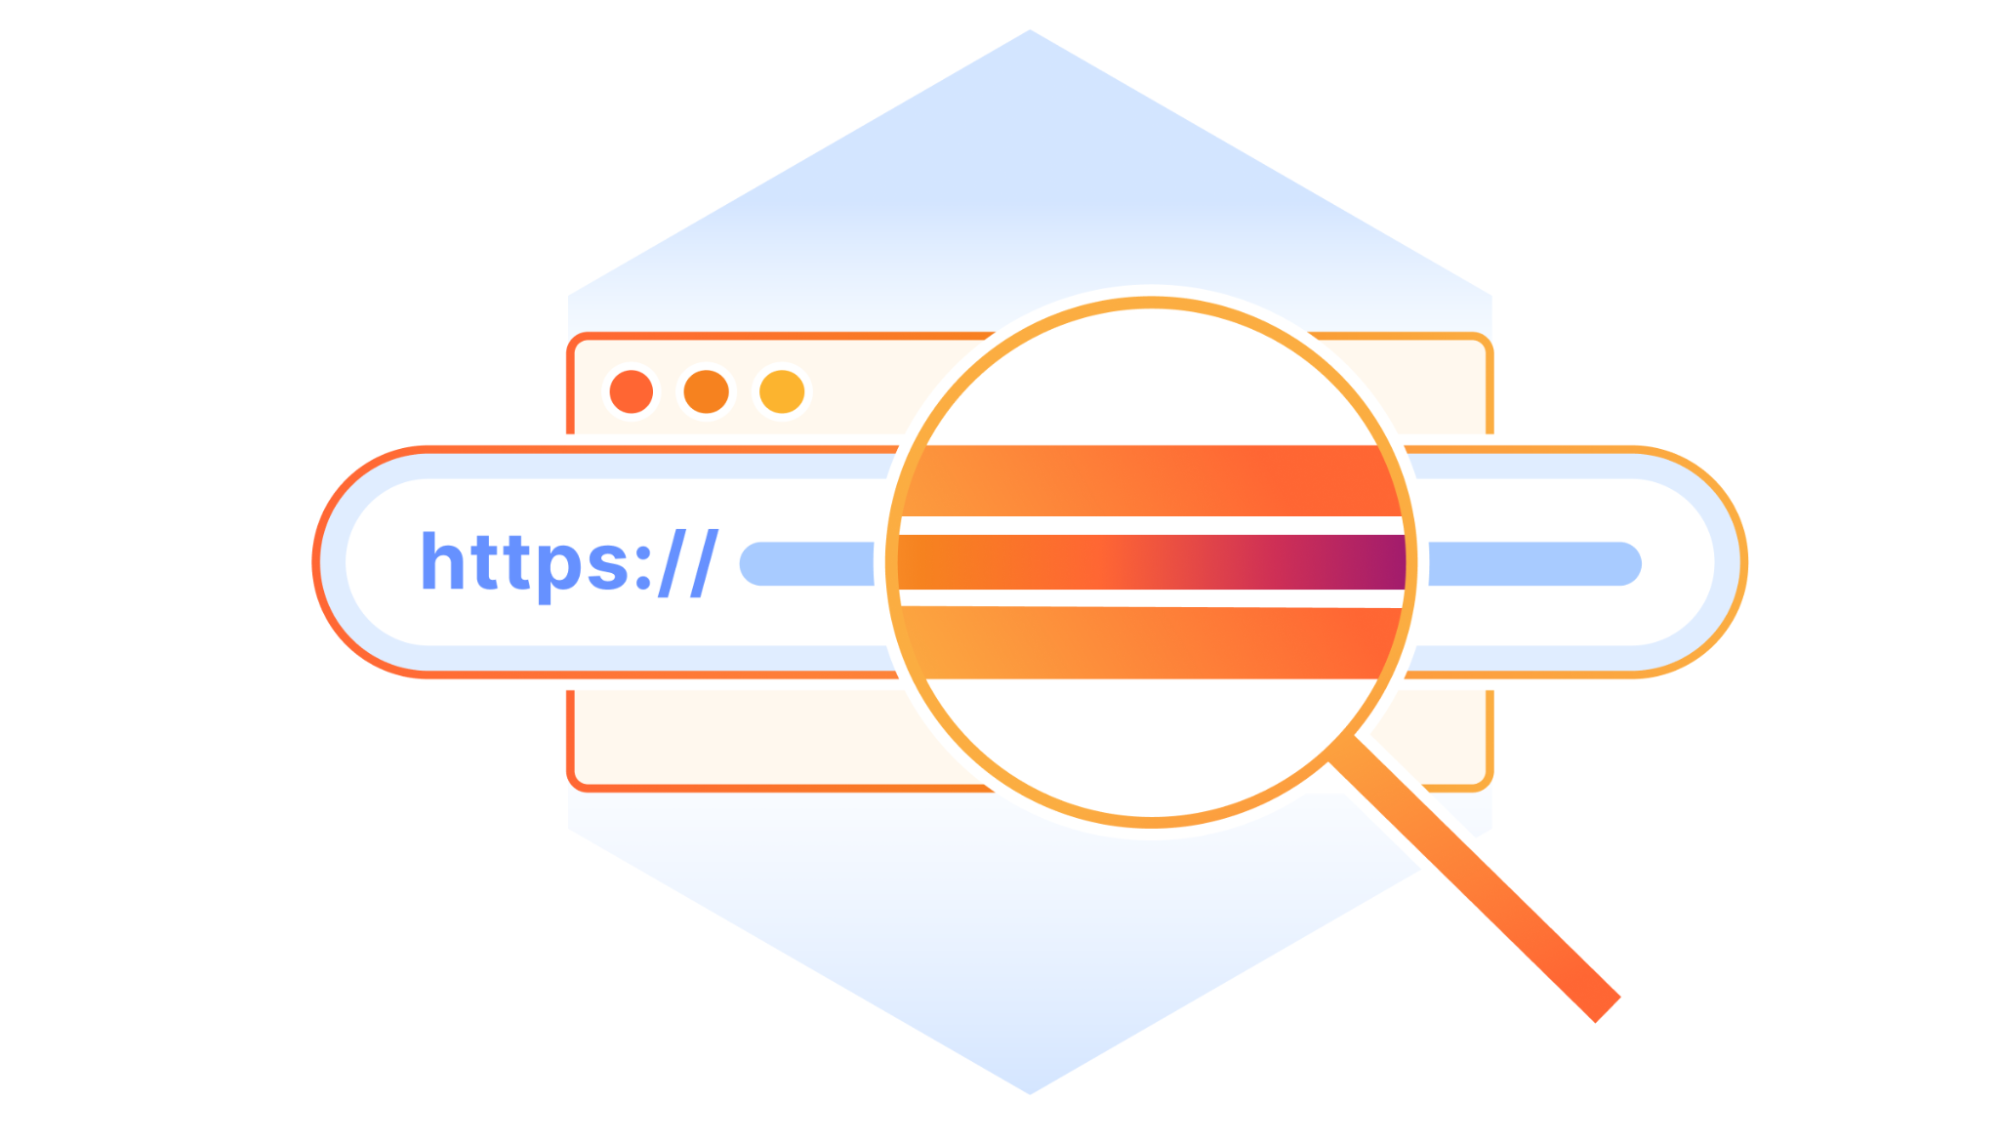 Cloudflare’s URL Scanner, new features, and the story of how we built it